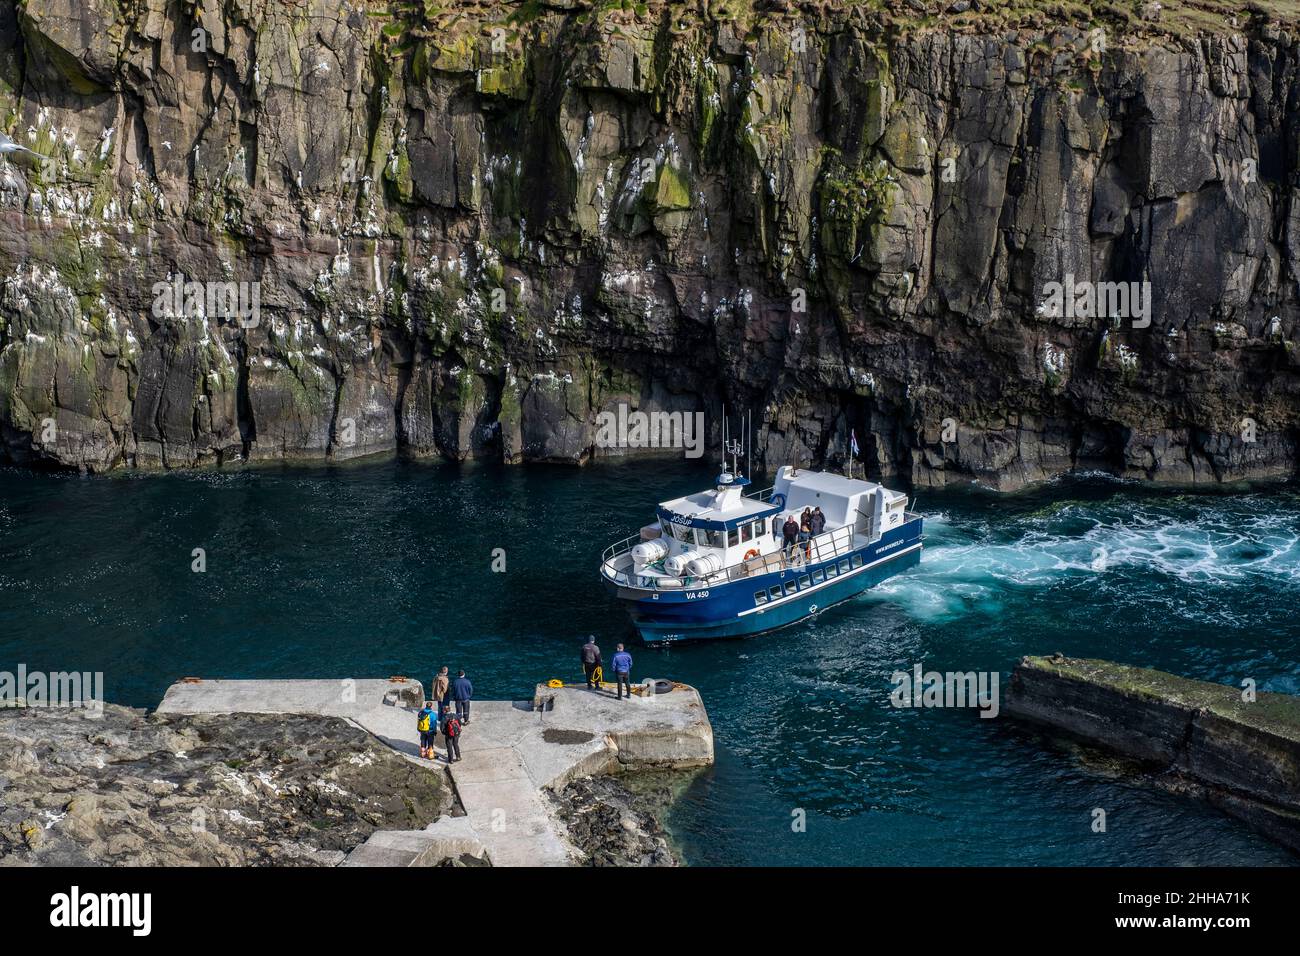 Ferry passes dramatic cliffs on its way to dock. Stock Photo